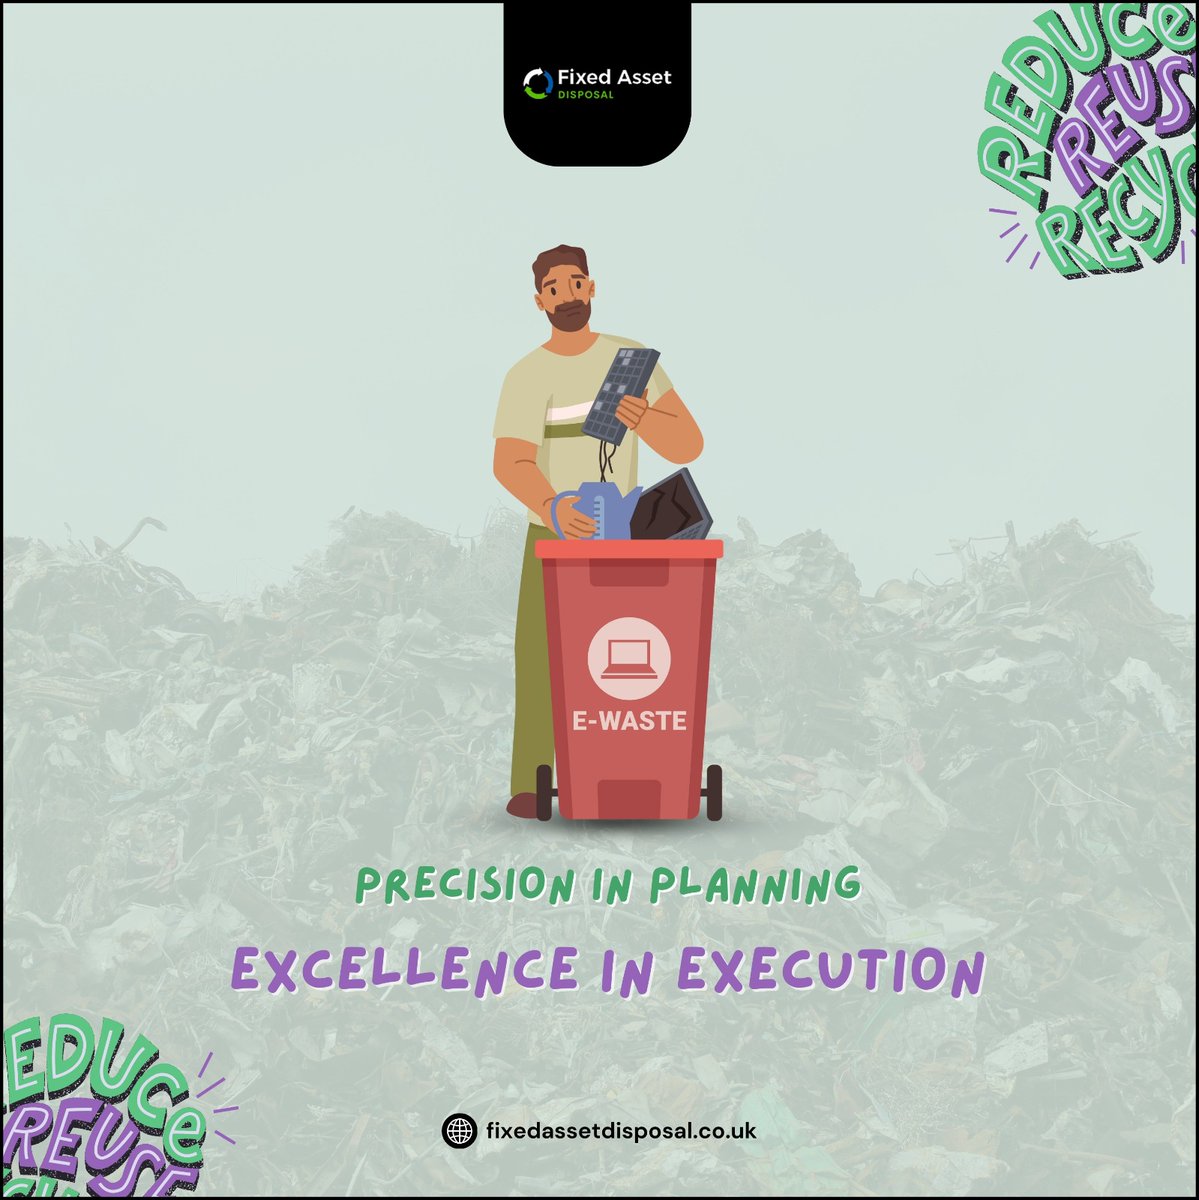 Precision in Planning, Excellence in Execution – where strategy meets success with flawless precision. 💼✨

#StrategicSuccess #ExcellenceUnleashed #ITRecycling #DataDestruction #WEEEManagement #EwasteDisposal #GreenTechRecycling #SustainableIT #CertifiedRecycling